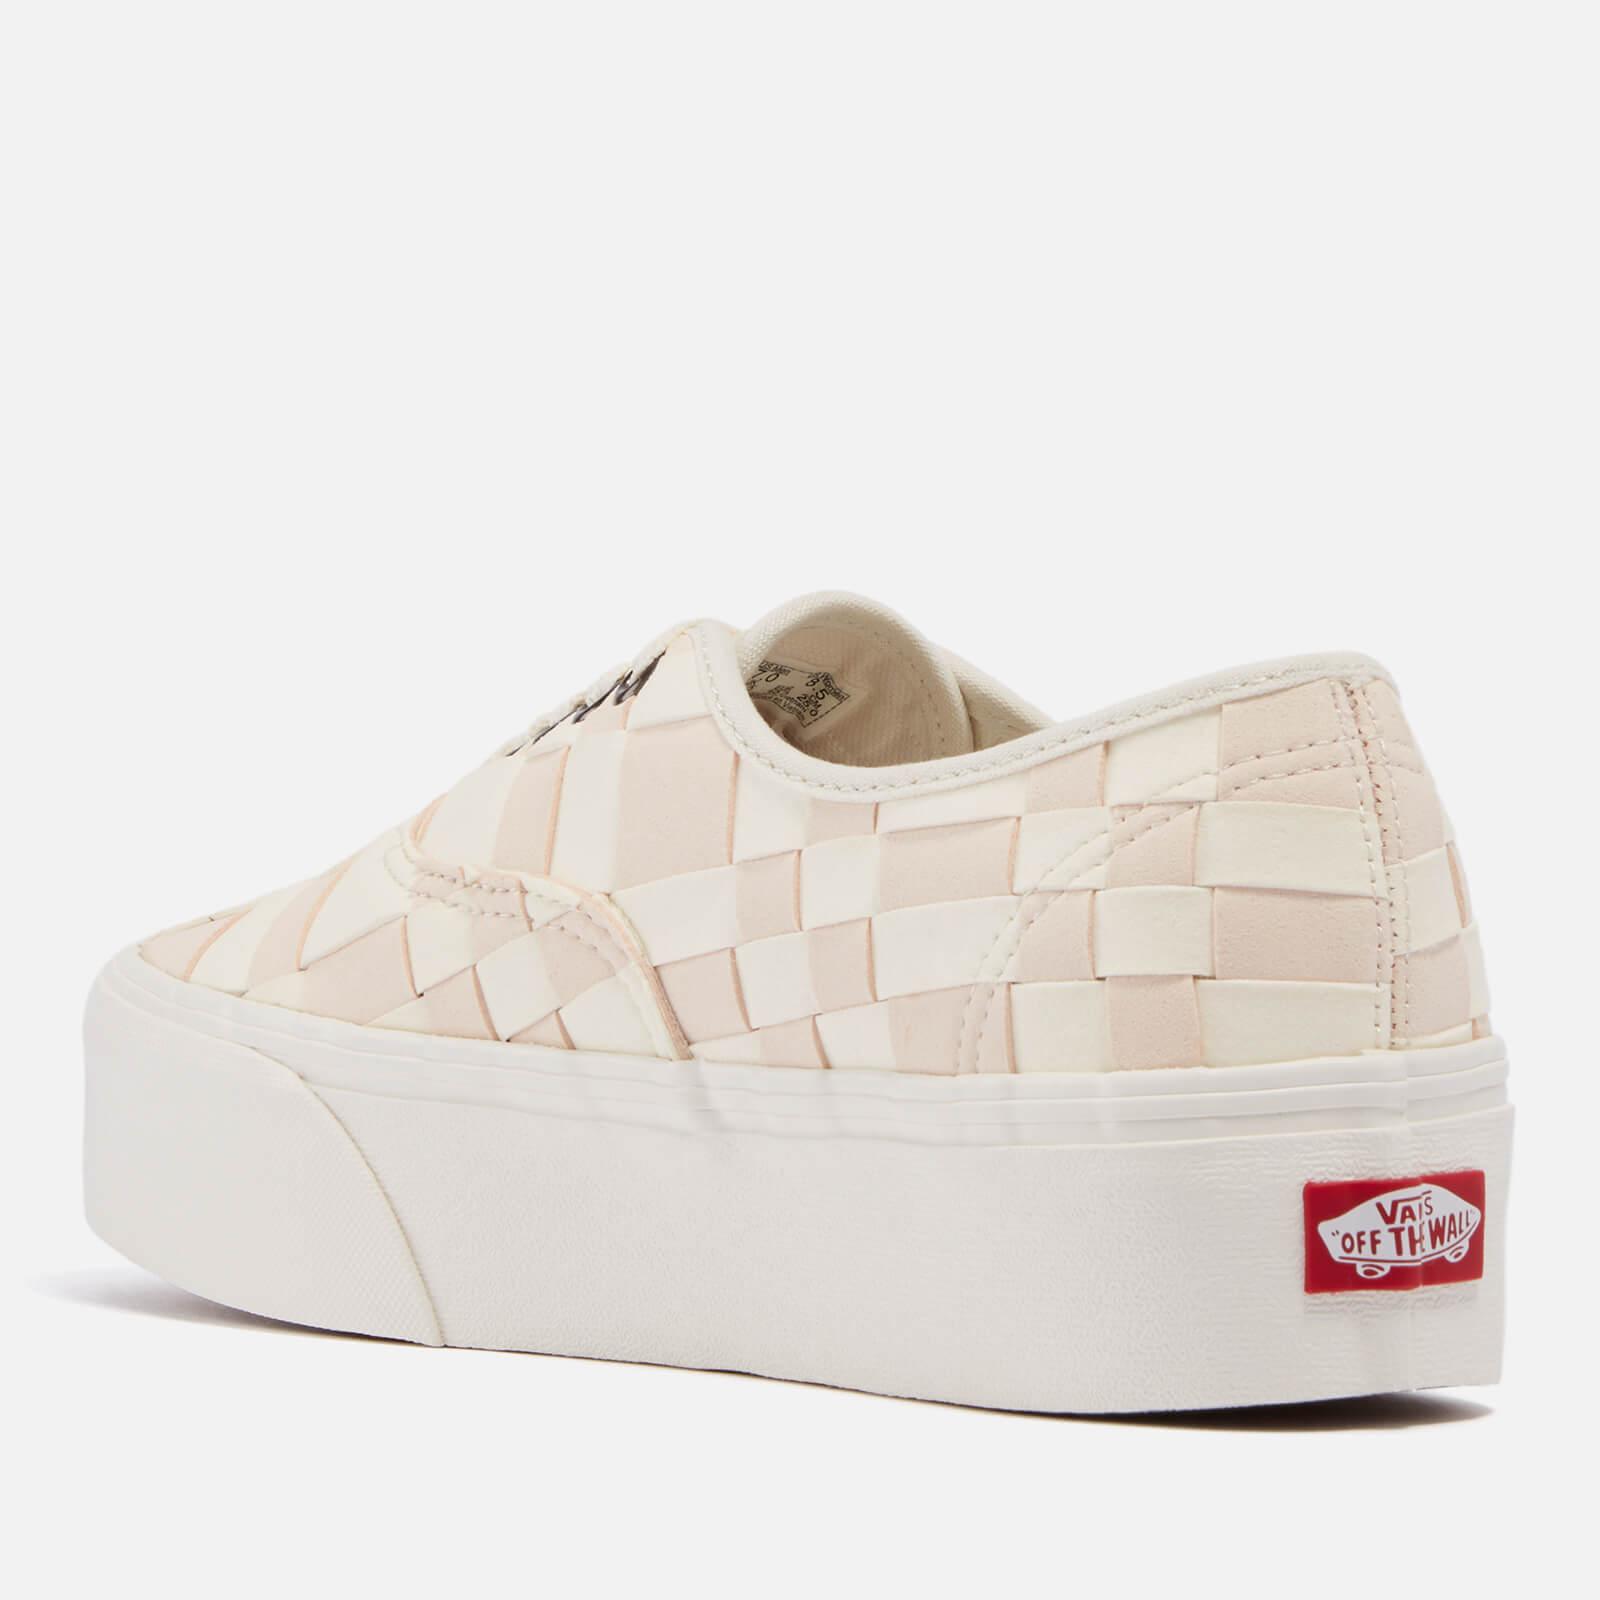 Vans Woven Check Authentic Stackform Faux Suede Trainers in White | Lyst